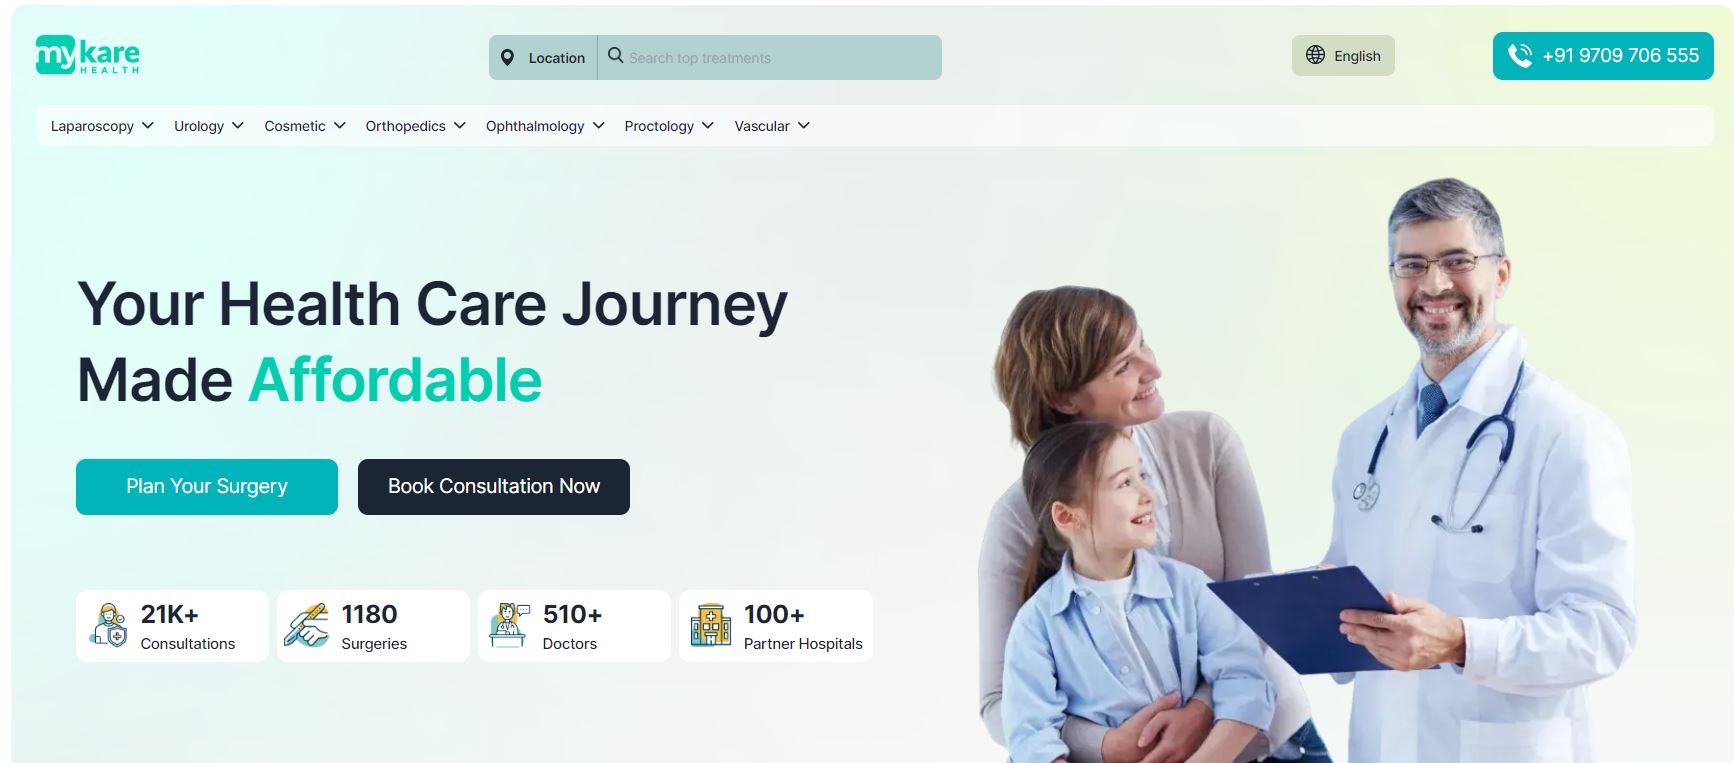 Mykare Health, founded by Senu Sam, has raised an impressive $2 million in seed funding